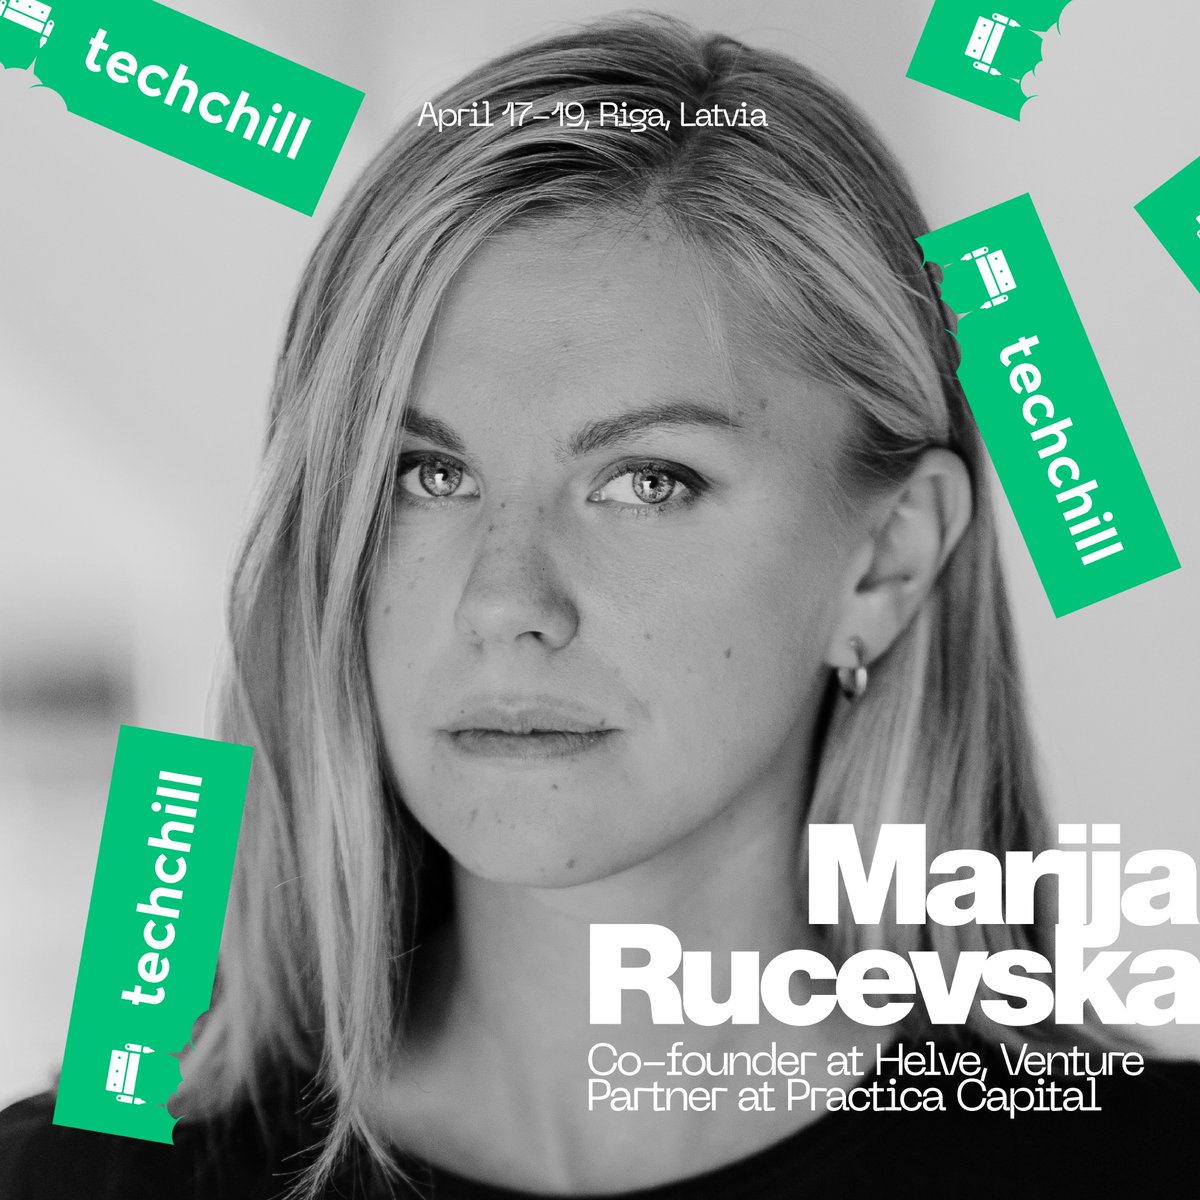 We're thrilled to announce @marijarucevska, Co-founder at @helve_eu and Venture Partner at @PracticaCapital, as our speaker for TechChill 2024! Join us in Riga on April 17-19! 🚀